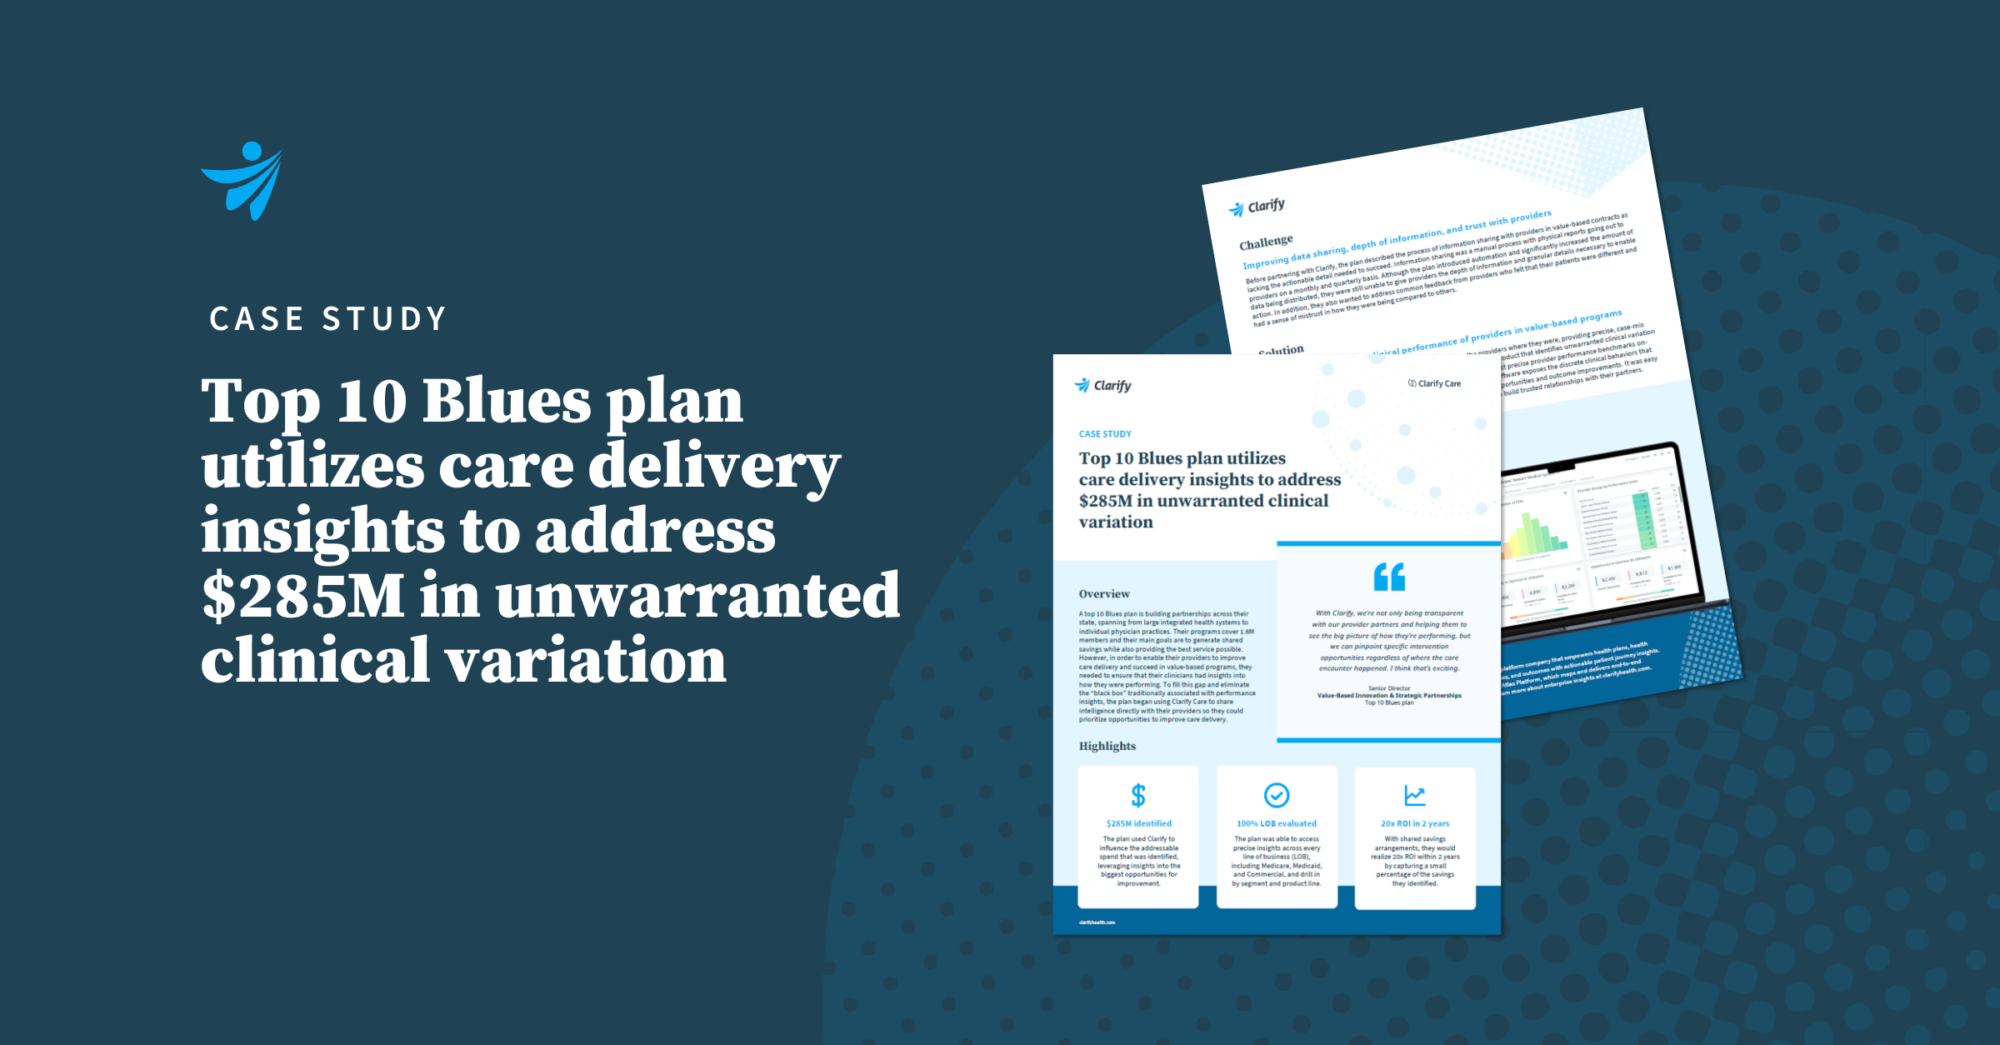 Thumbnail for A Top 10 Blues plan utilizes care delivery insights to address $285M in unwarranted clinical variation